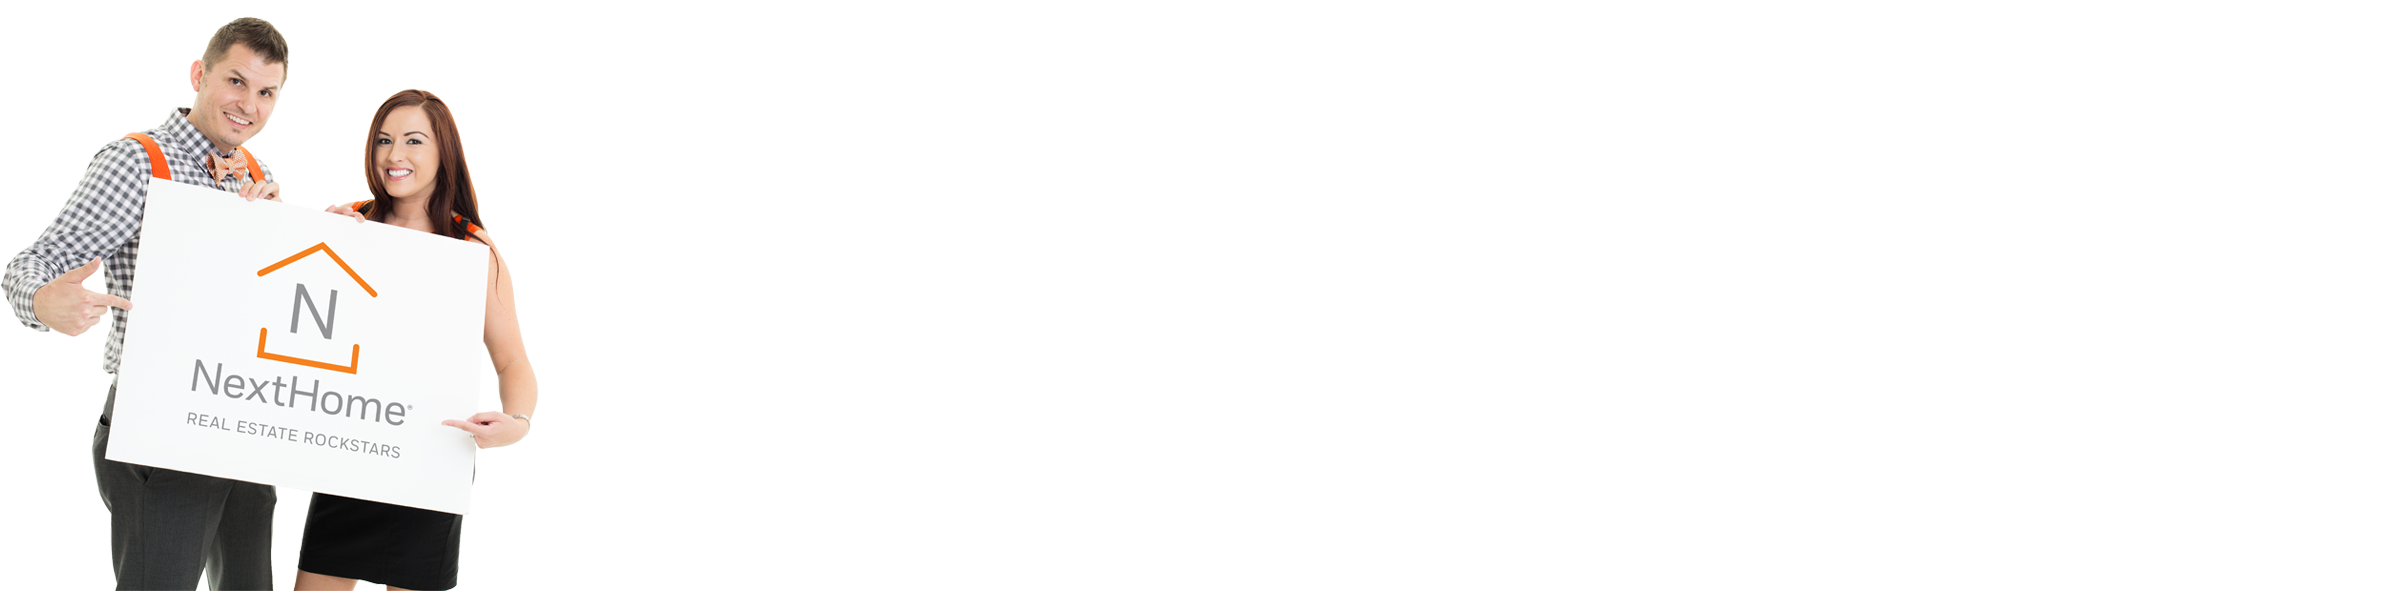 Cherrie And Zach Nexthome Real Estate Rockstars Home Page